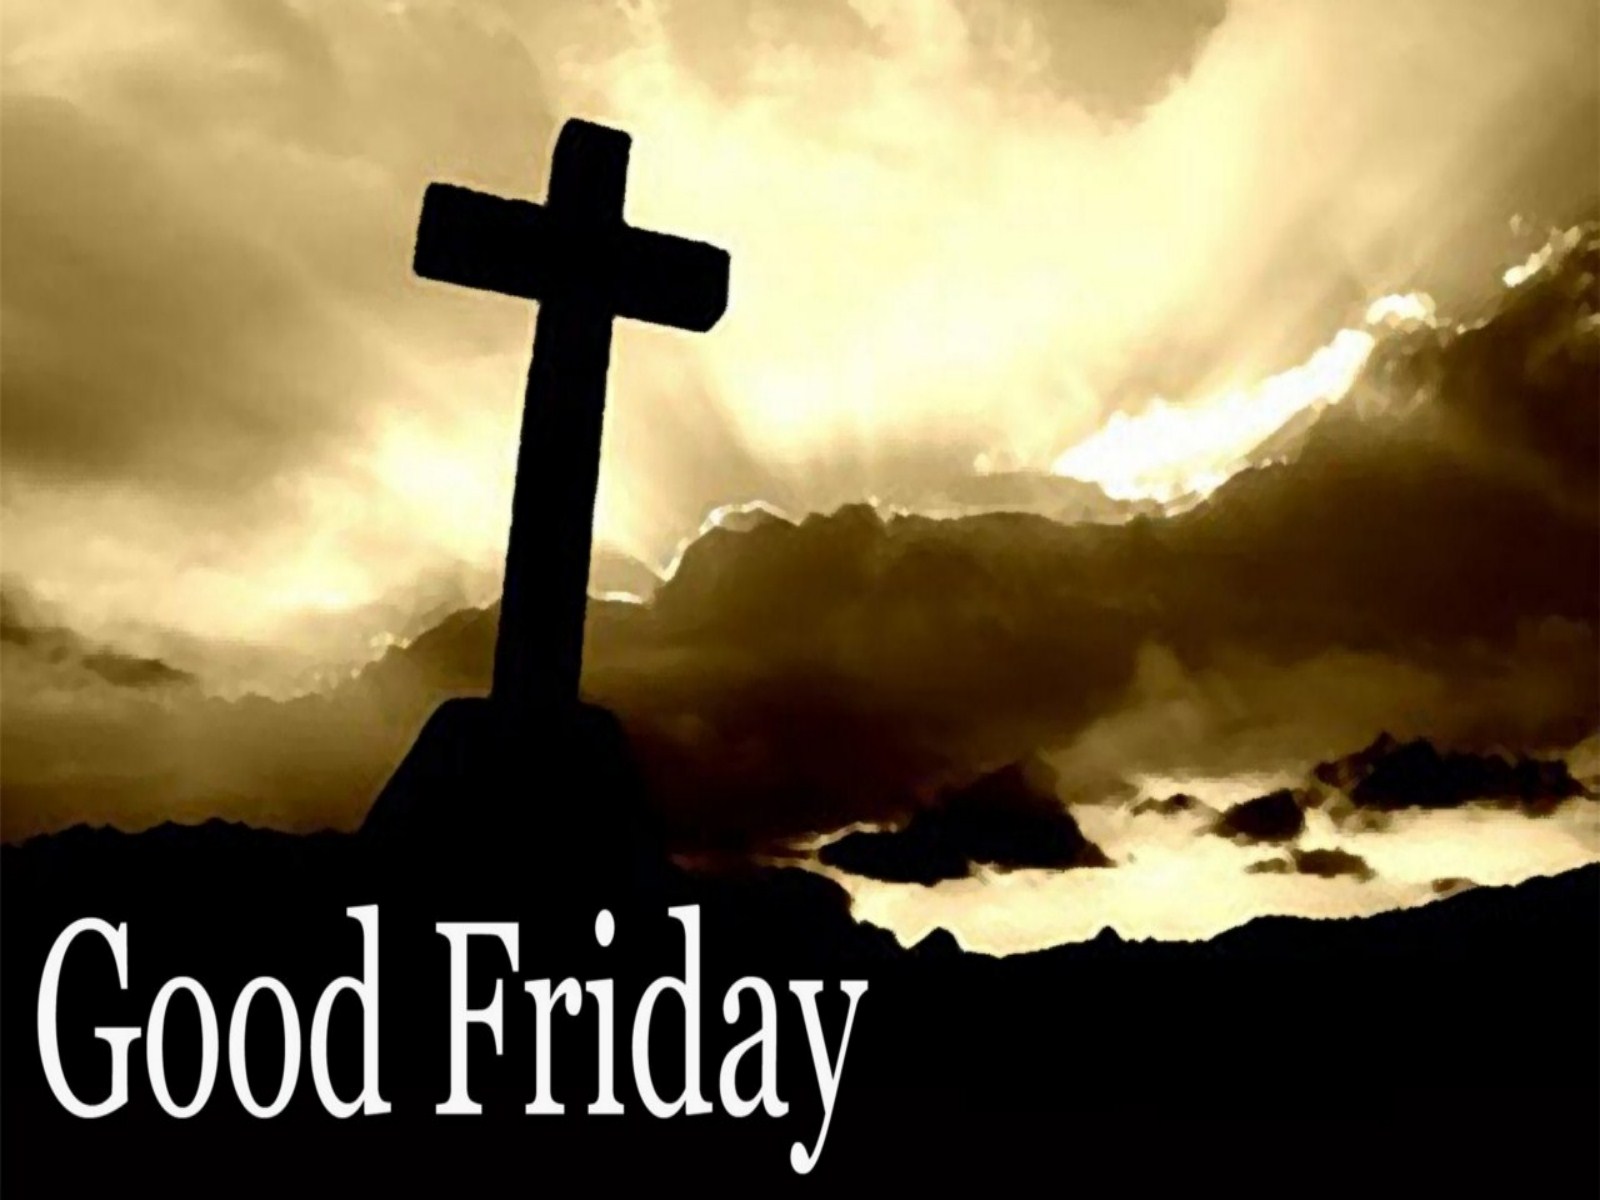 Good Friday Quotes Sayings Wishes Messages Status